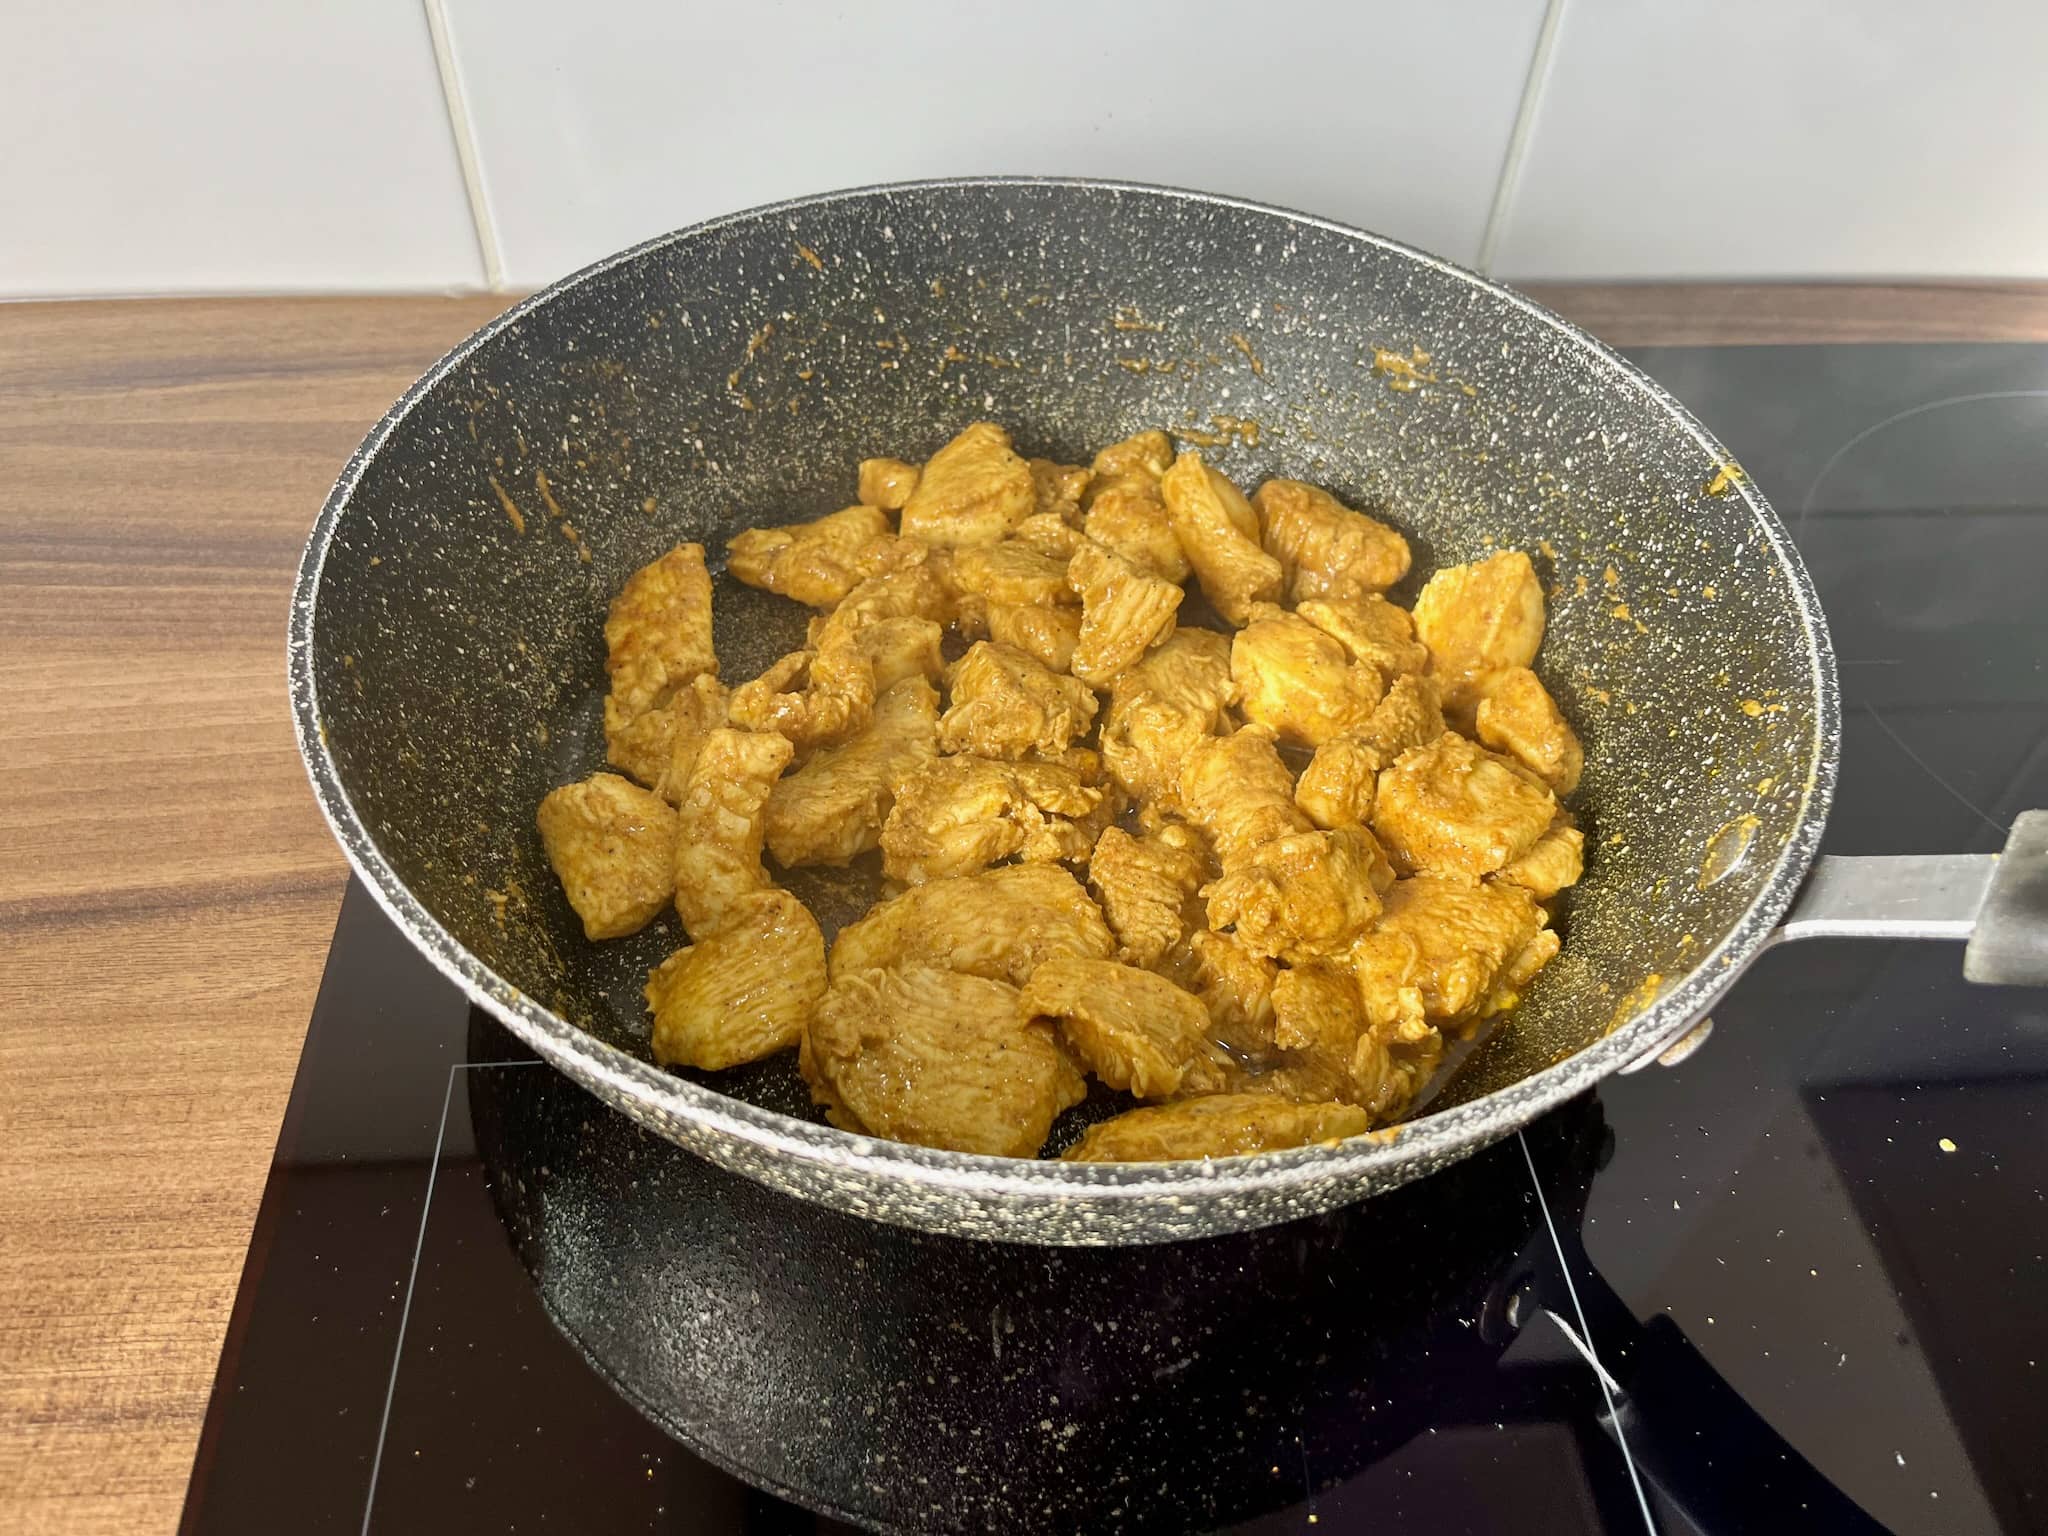 Cooked marinated chicken in a frying pan